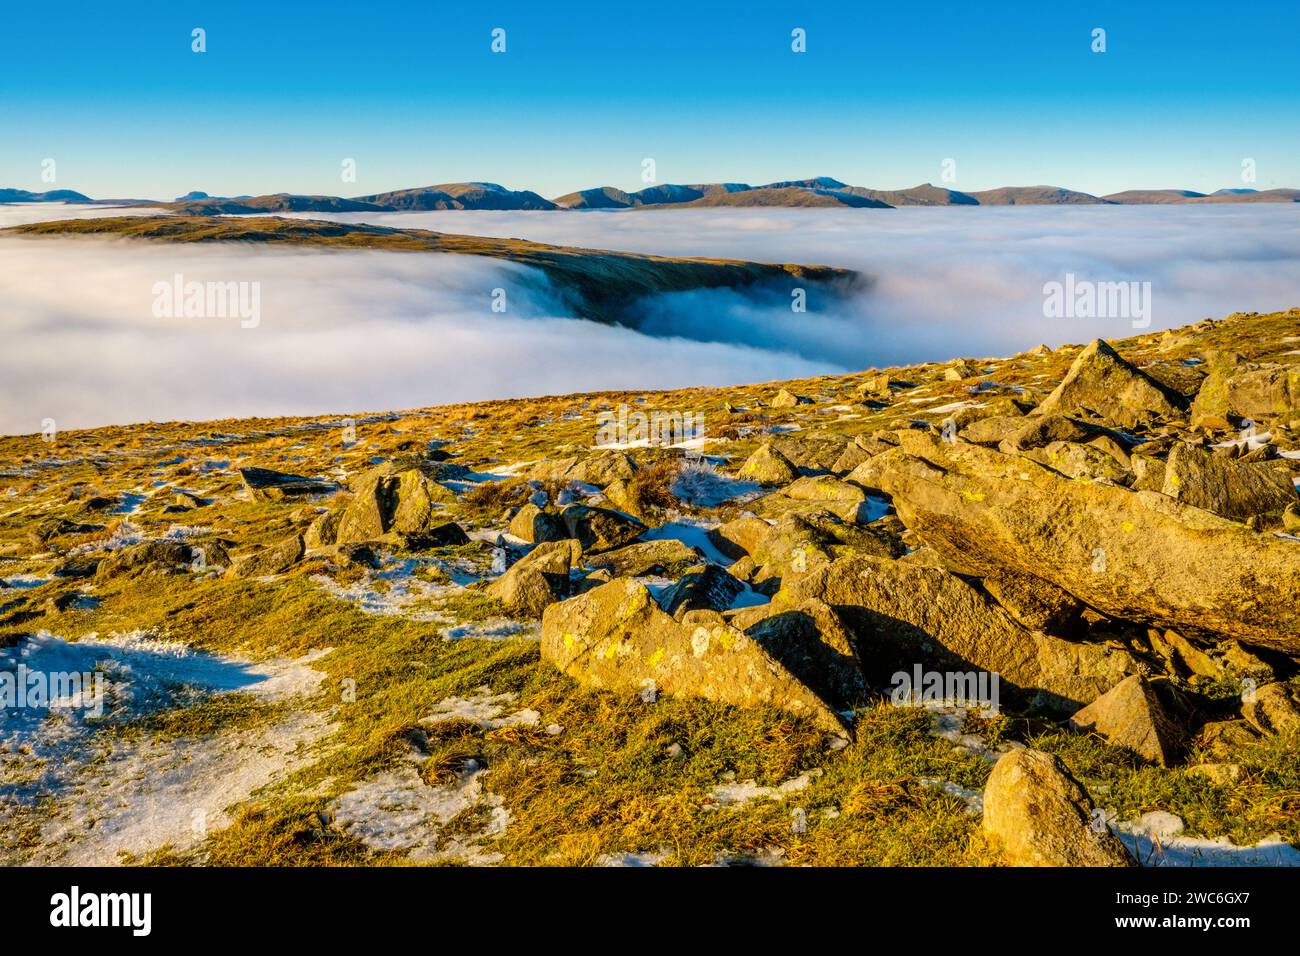 The Helvellyn range seen above a cloud inversion / temperature inversion from Thornthwaite Crag in the Lake District National Park, Cumbria, UK Stock Photo